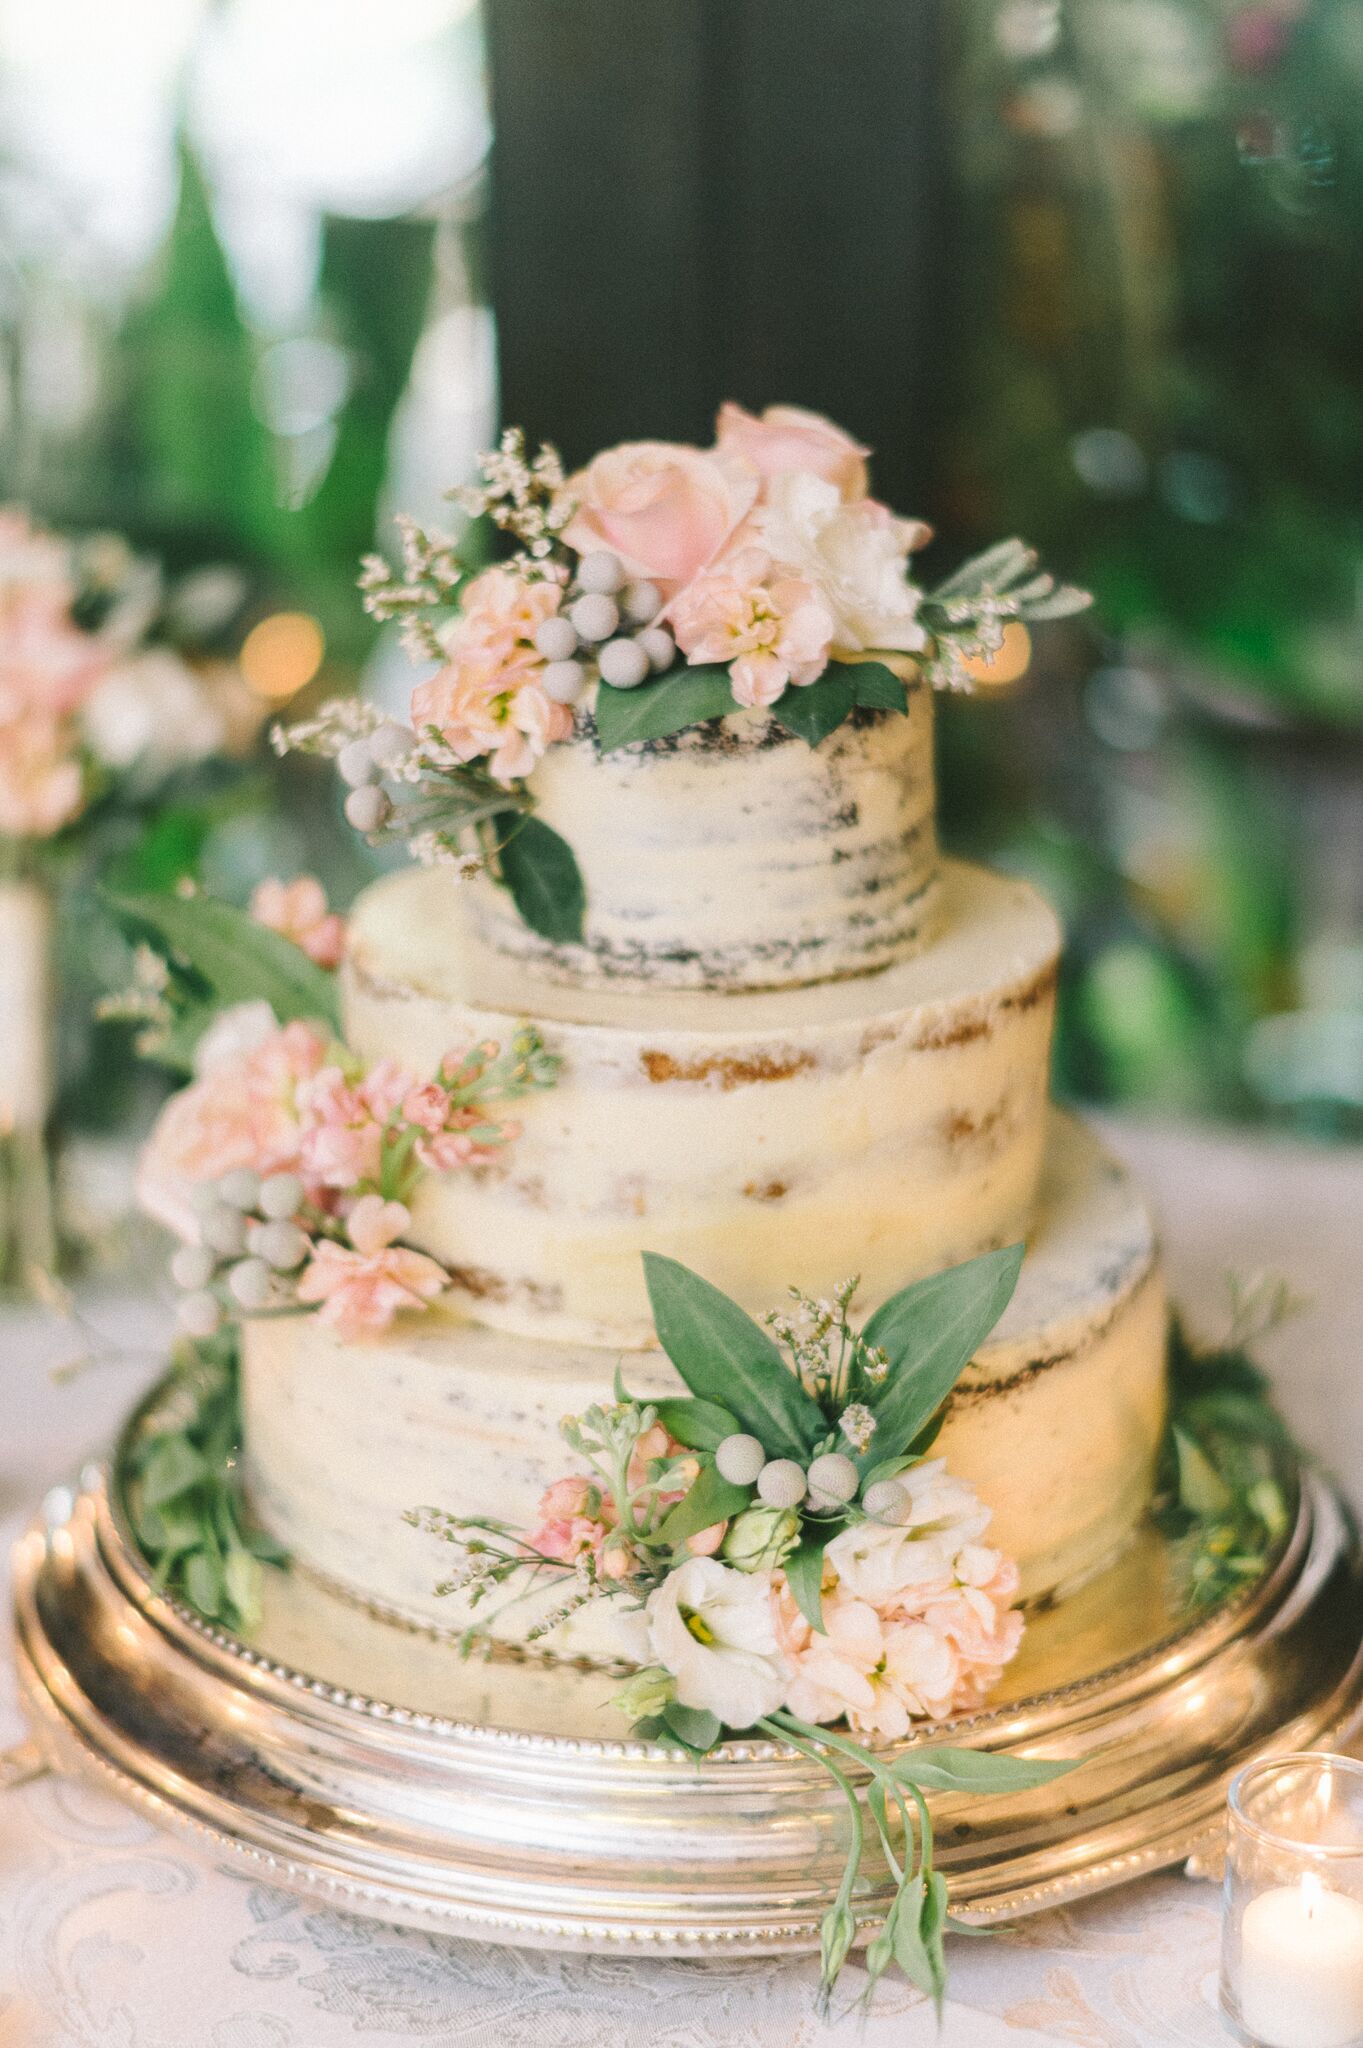 Naked Cake with Blush Roses and Silver Brunia